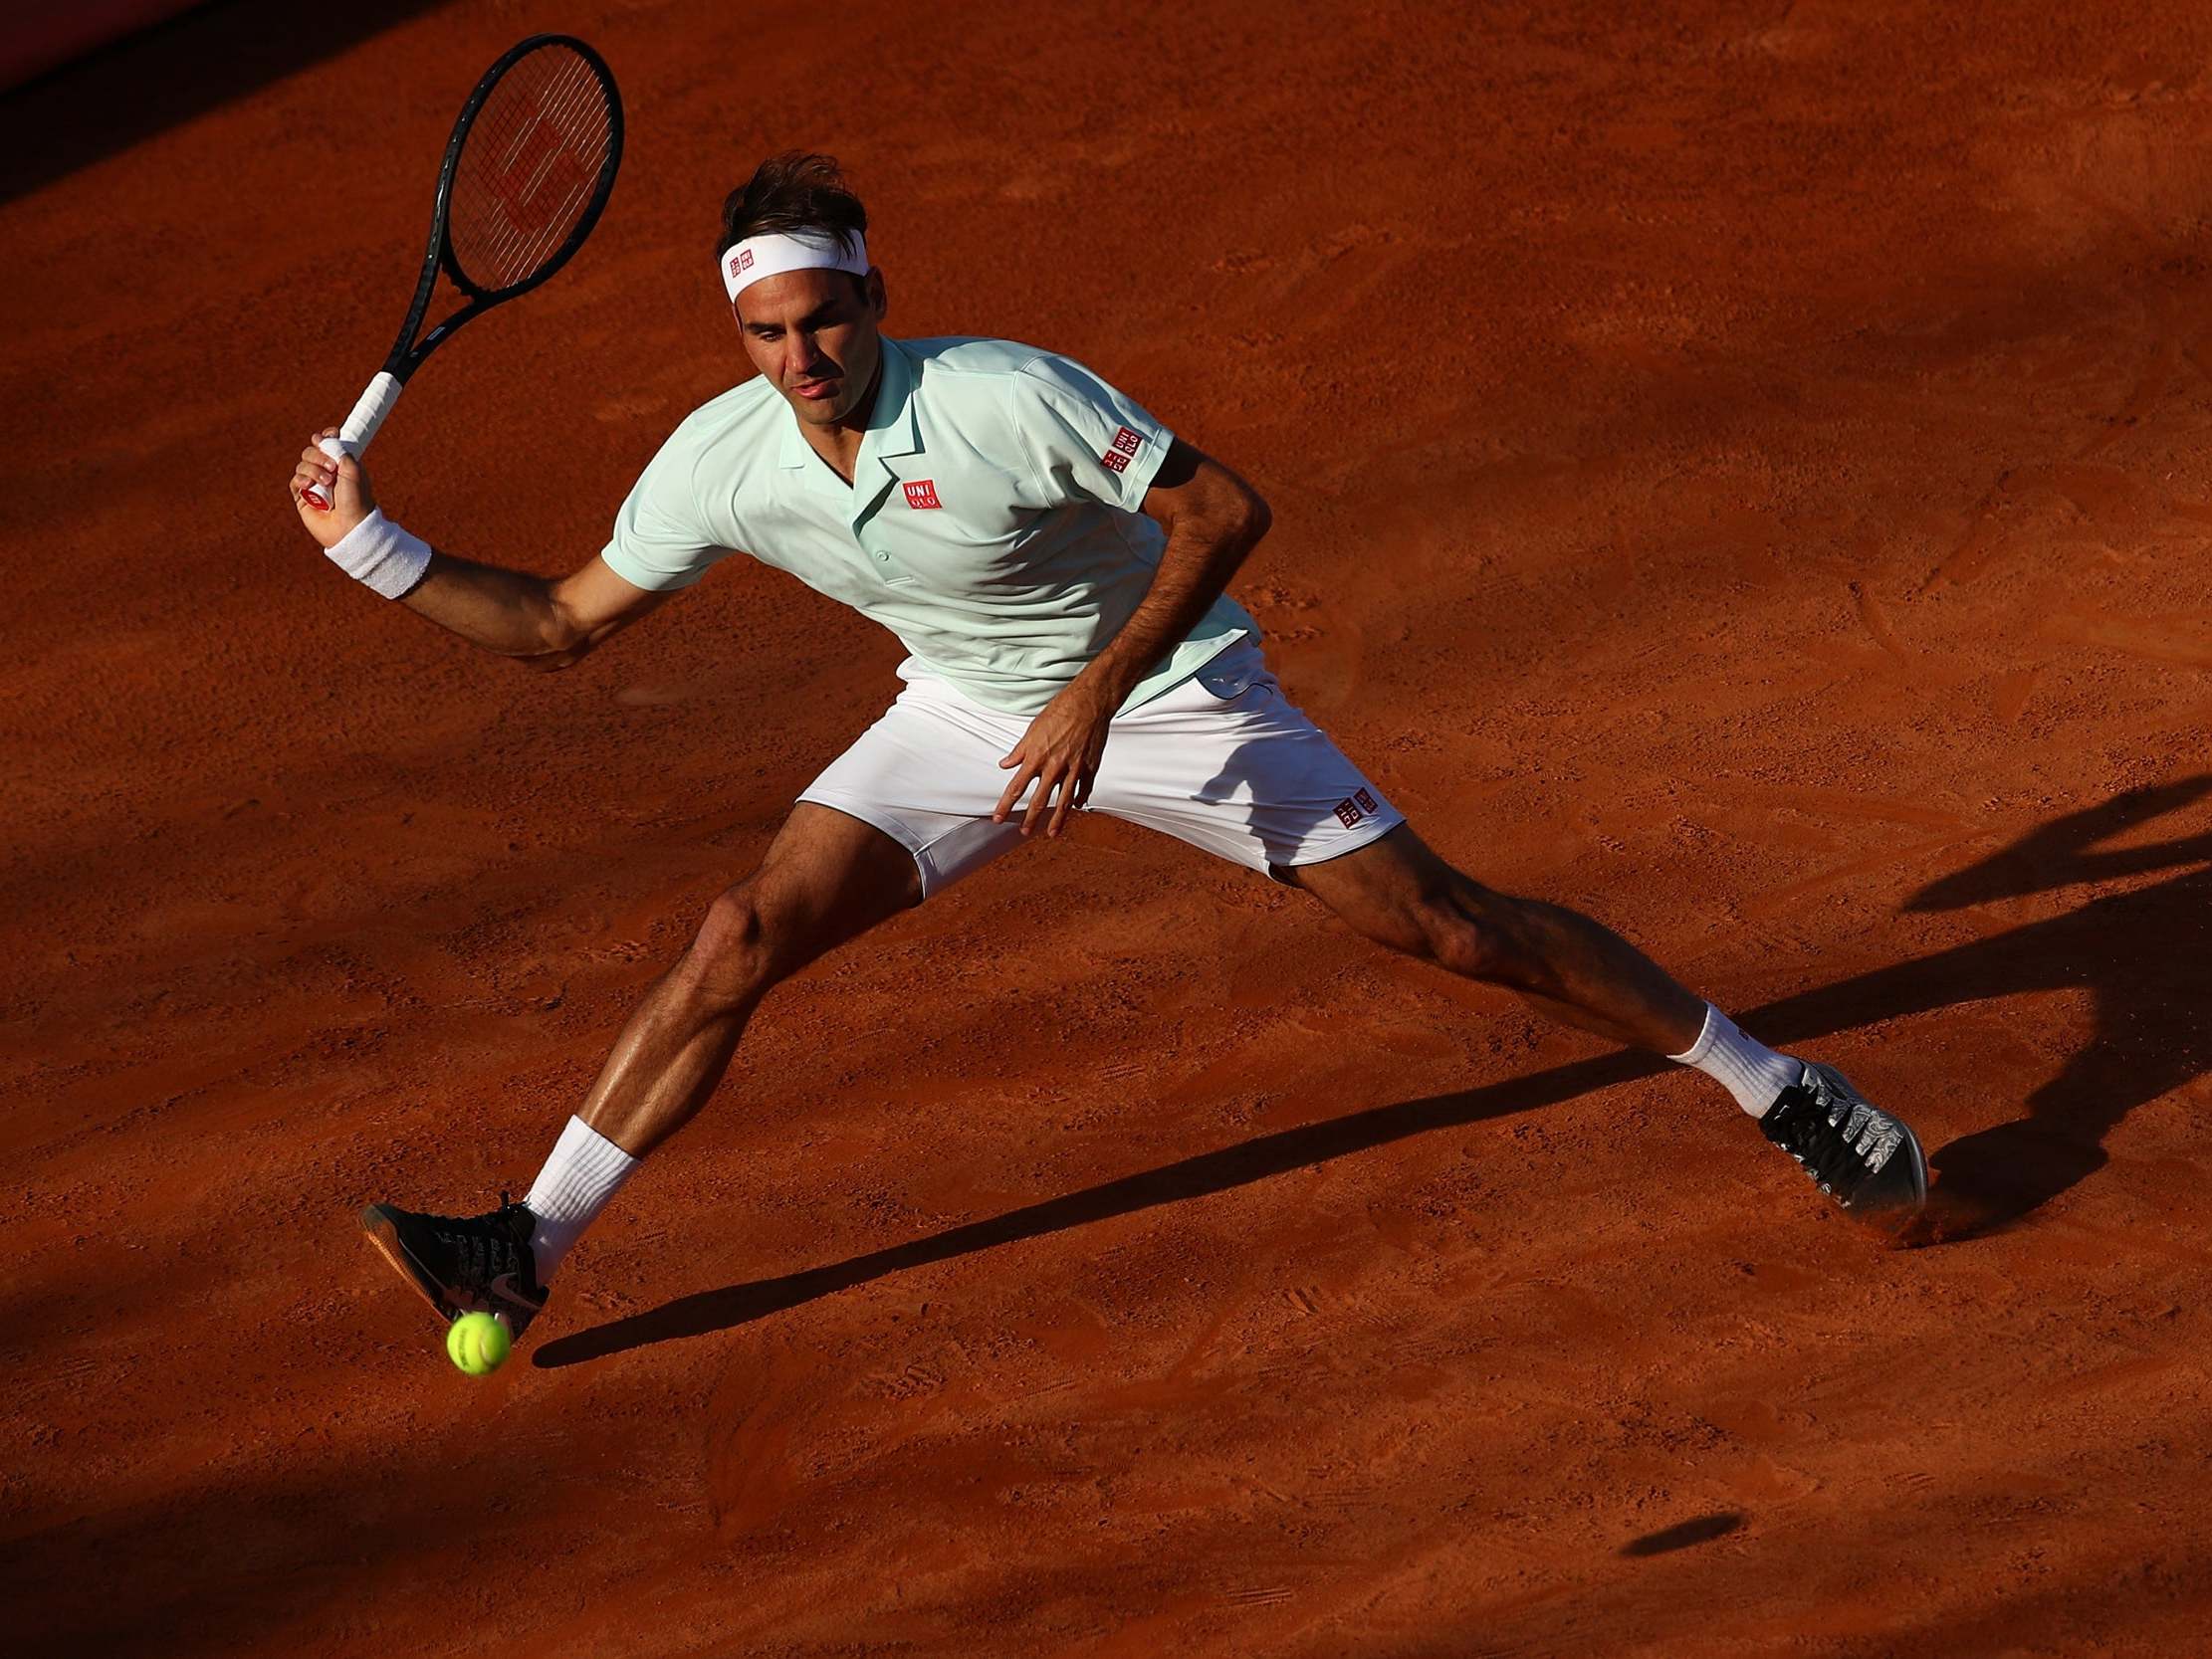 This week Federer returns to the clay where his Grand Slam career began 20 years ago